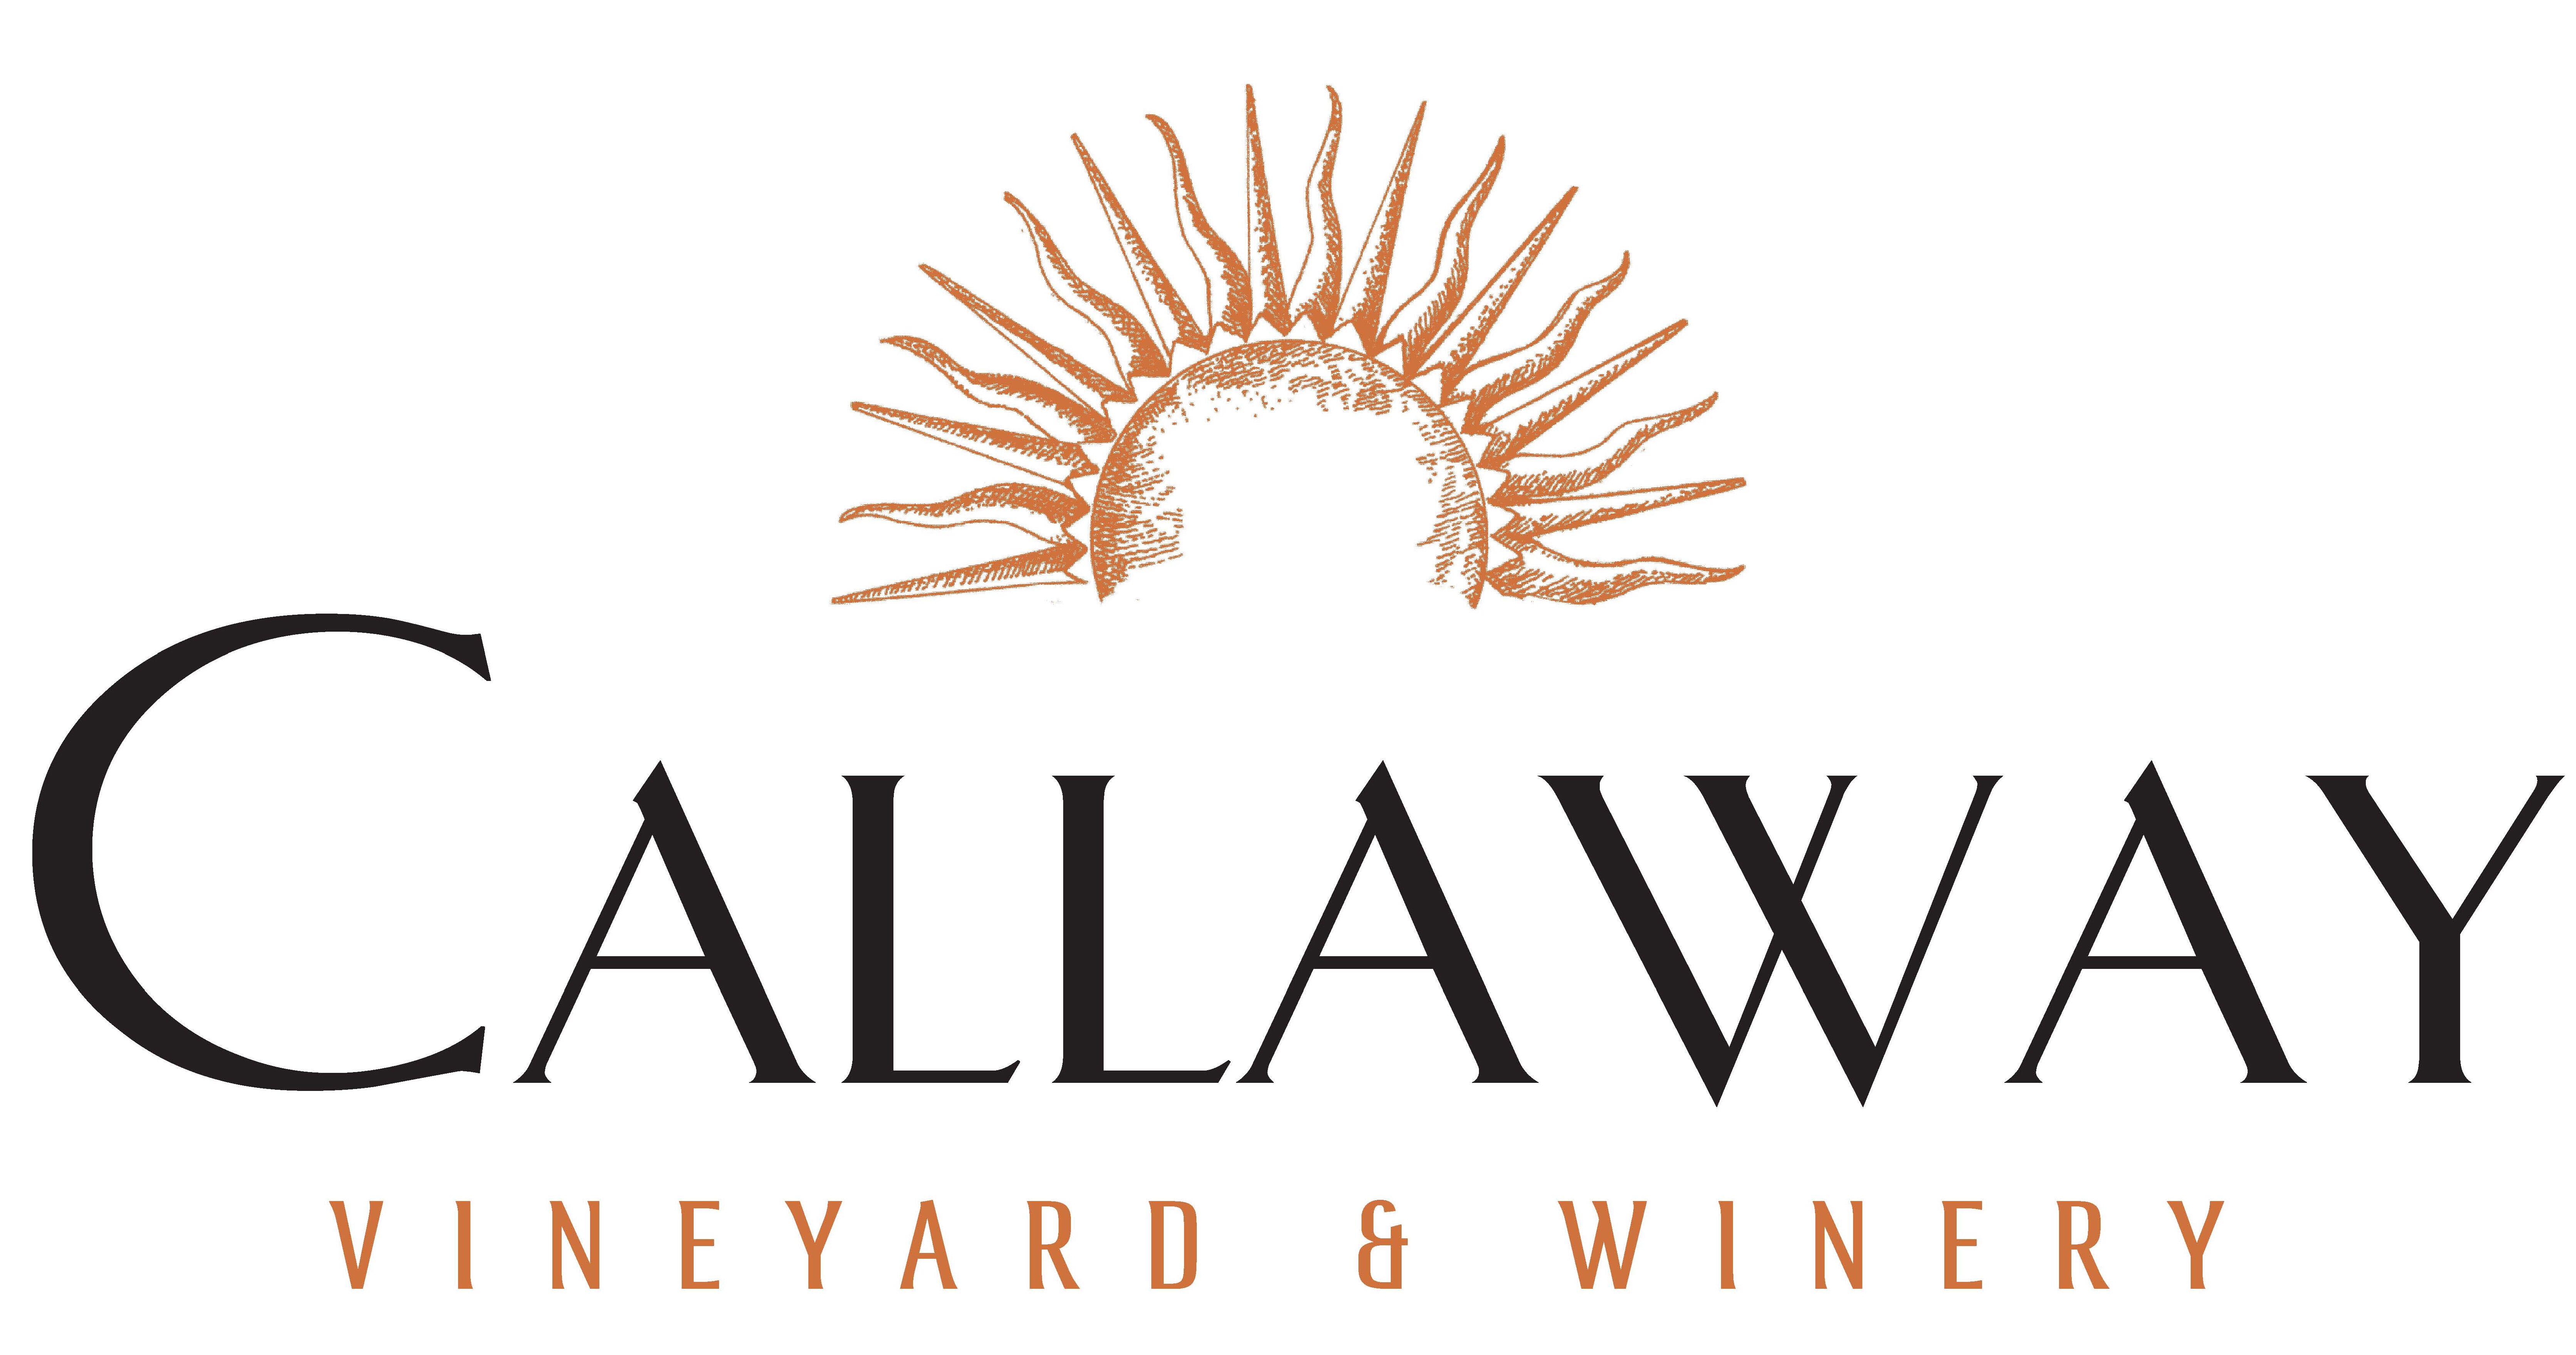 Callaway Vineyard & Winery | Reception Venues - The Knot